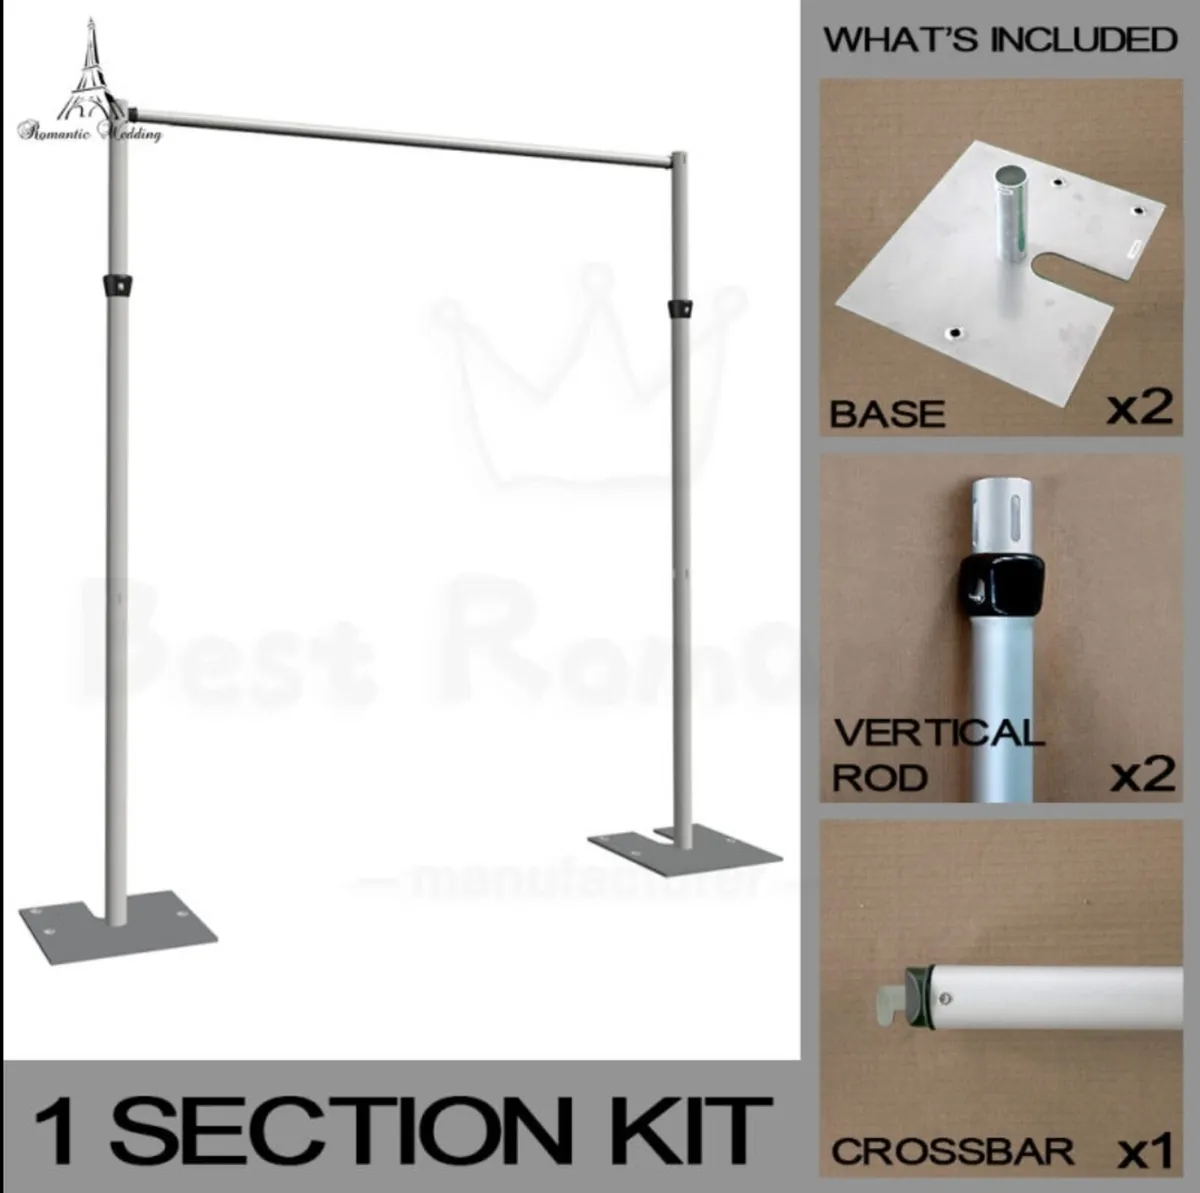 Telescopic Backdrop Stands - Image 1